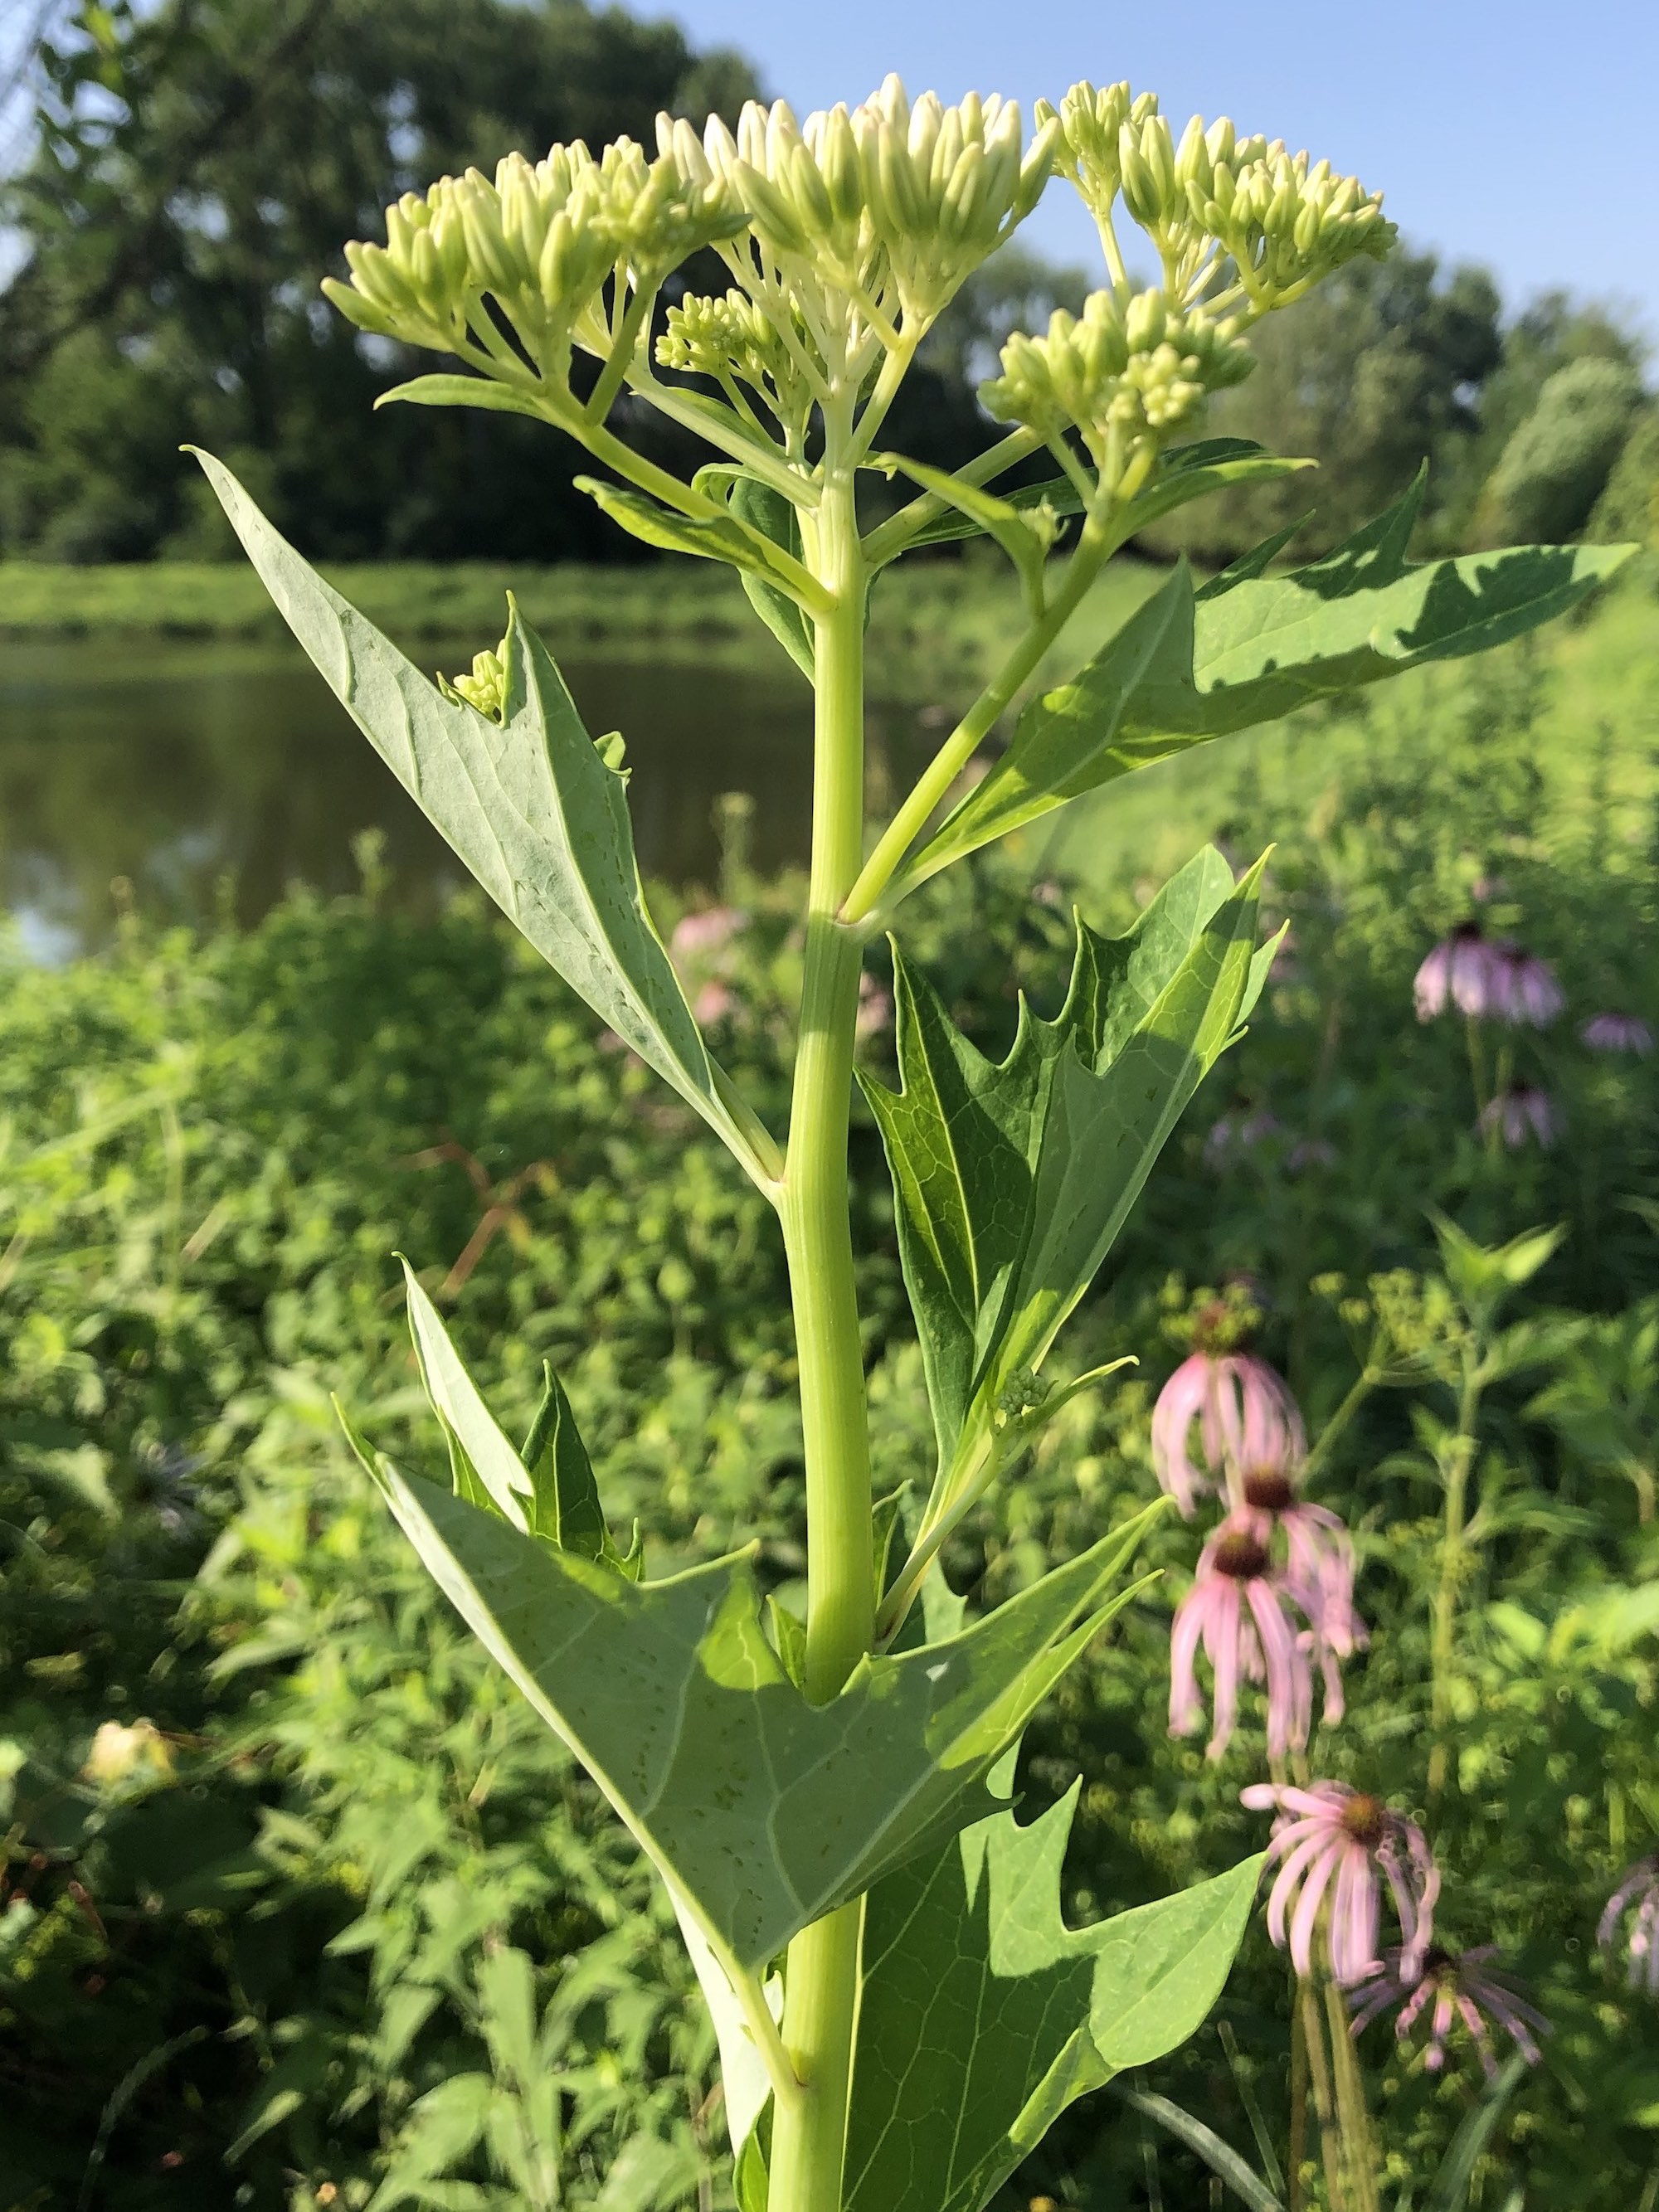 Pale Indian Plantain on bank of retaining pond on corner of Nakoma Road and Manitou Way in Madison, Wisconsin on July 7, 2019.